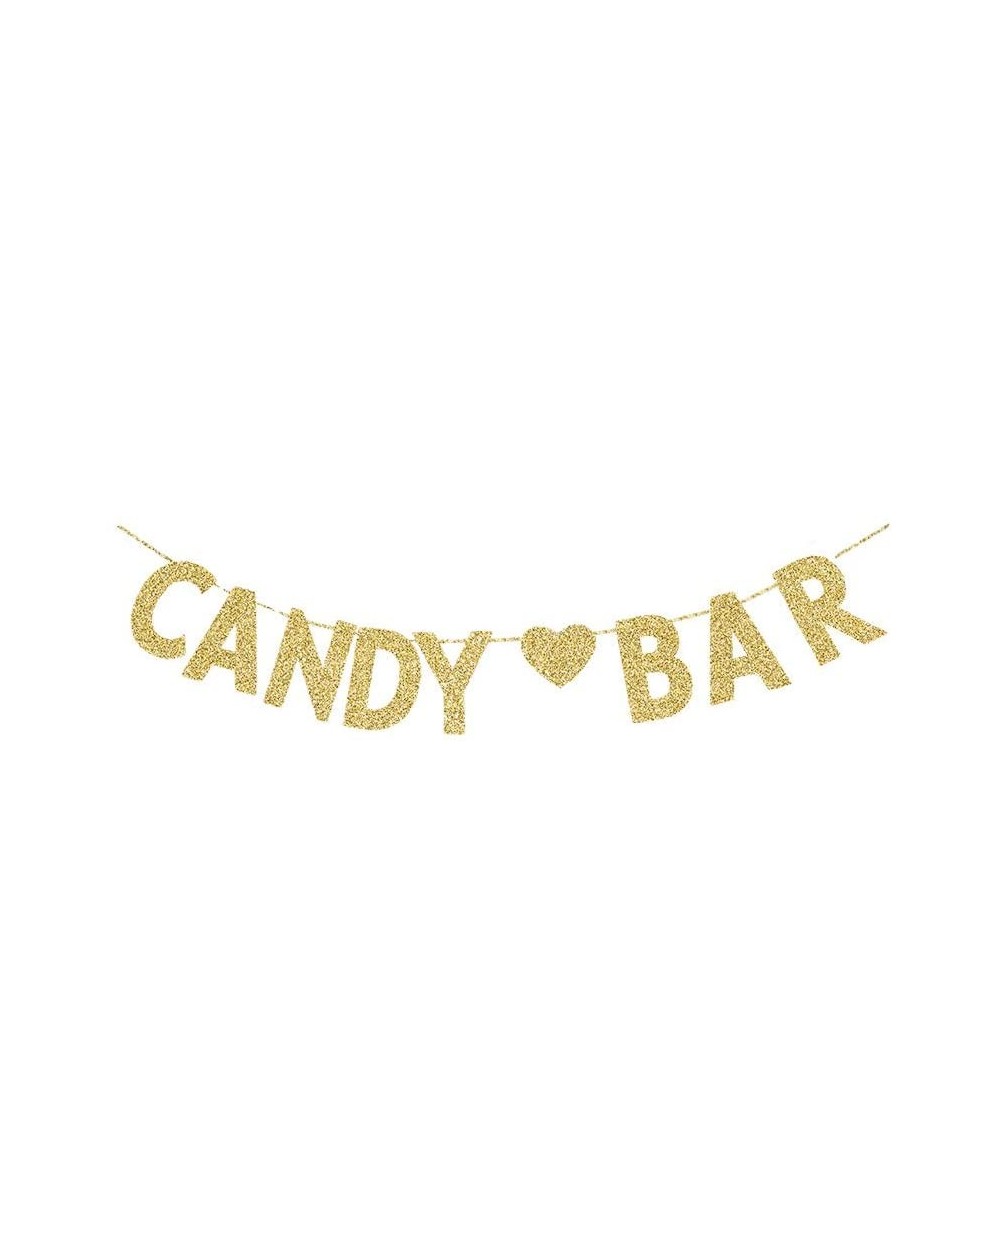 Banners & Garlands Candy Bar Banner- Gold Gliter Paper Sign Decors for Birthday/Wedding/Engagement Party - CX18E3DI99O $19.16